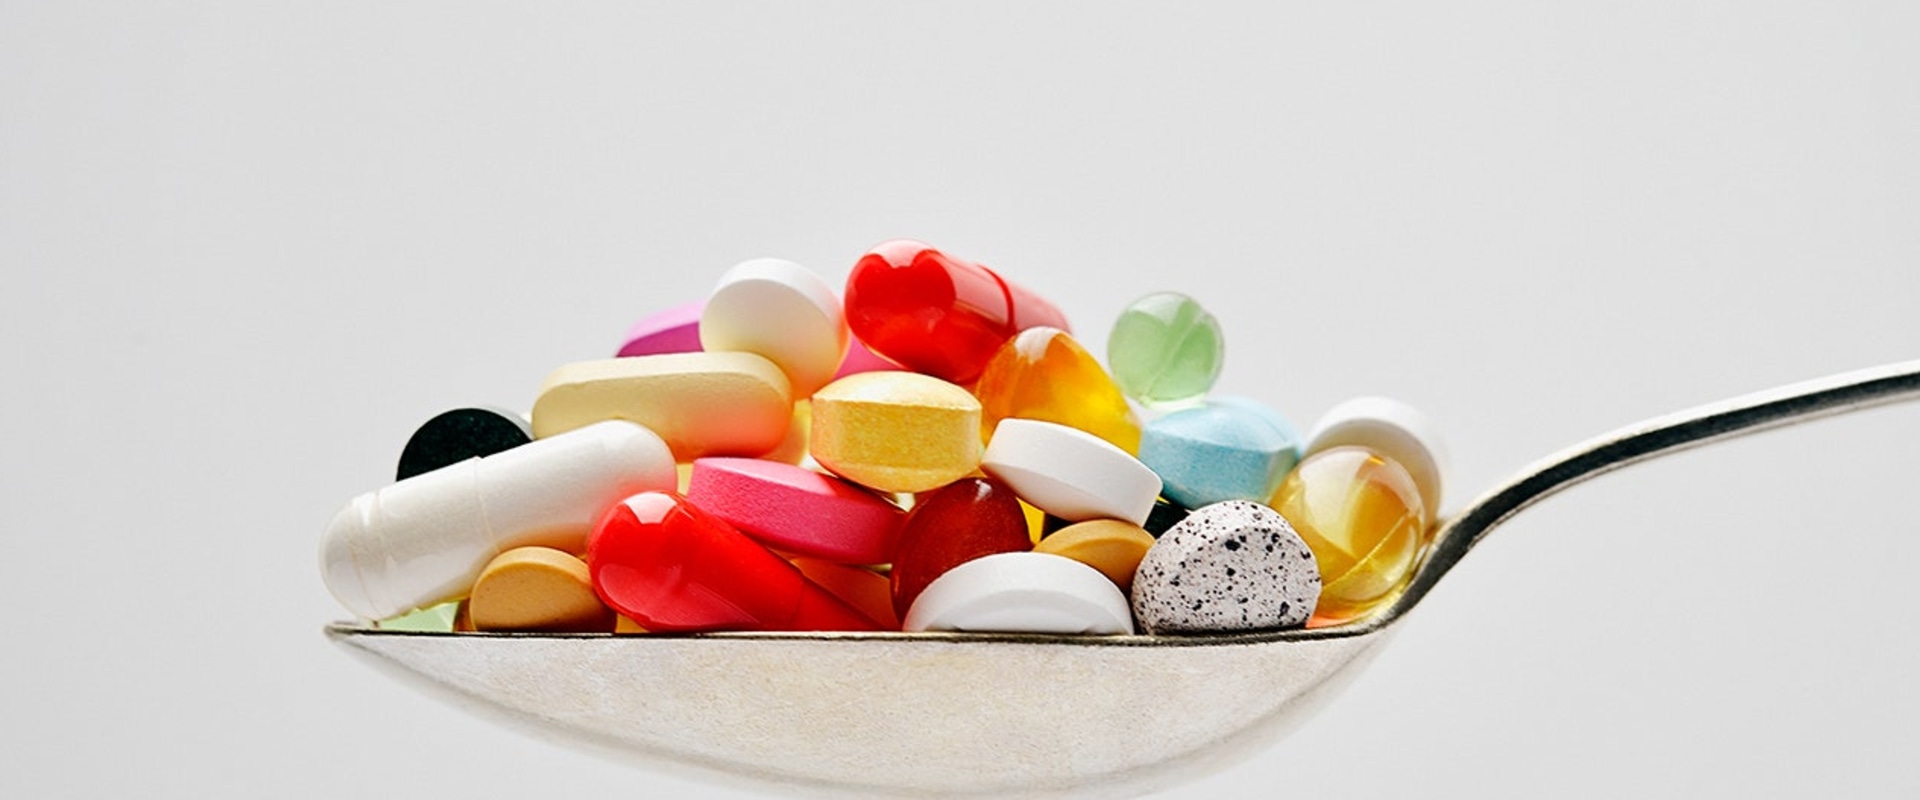 Are Dietary Supplements Safe? The Risks of Taking Too Many